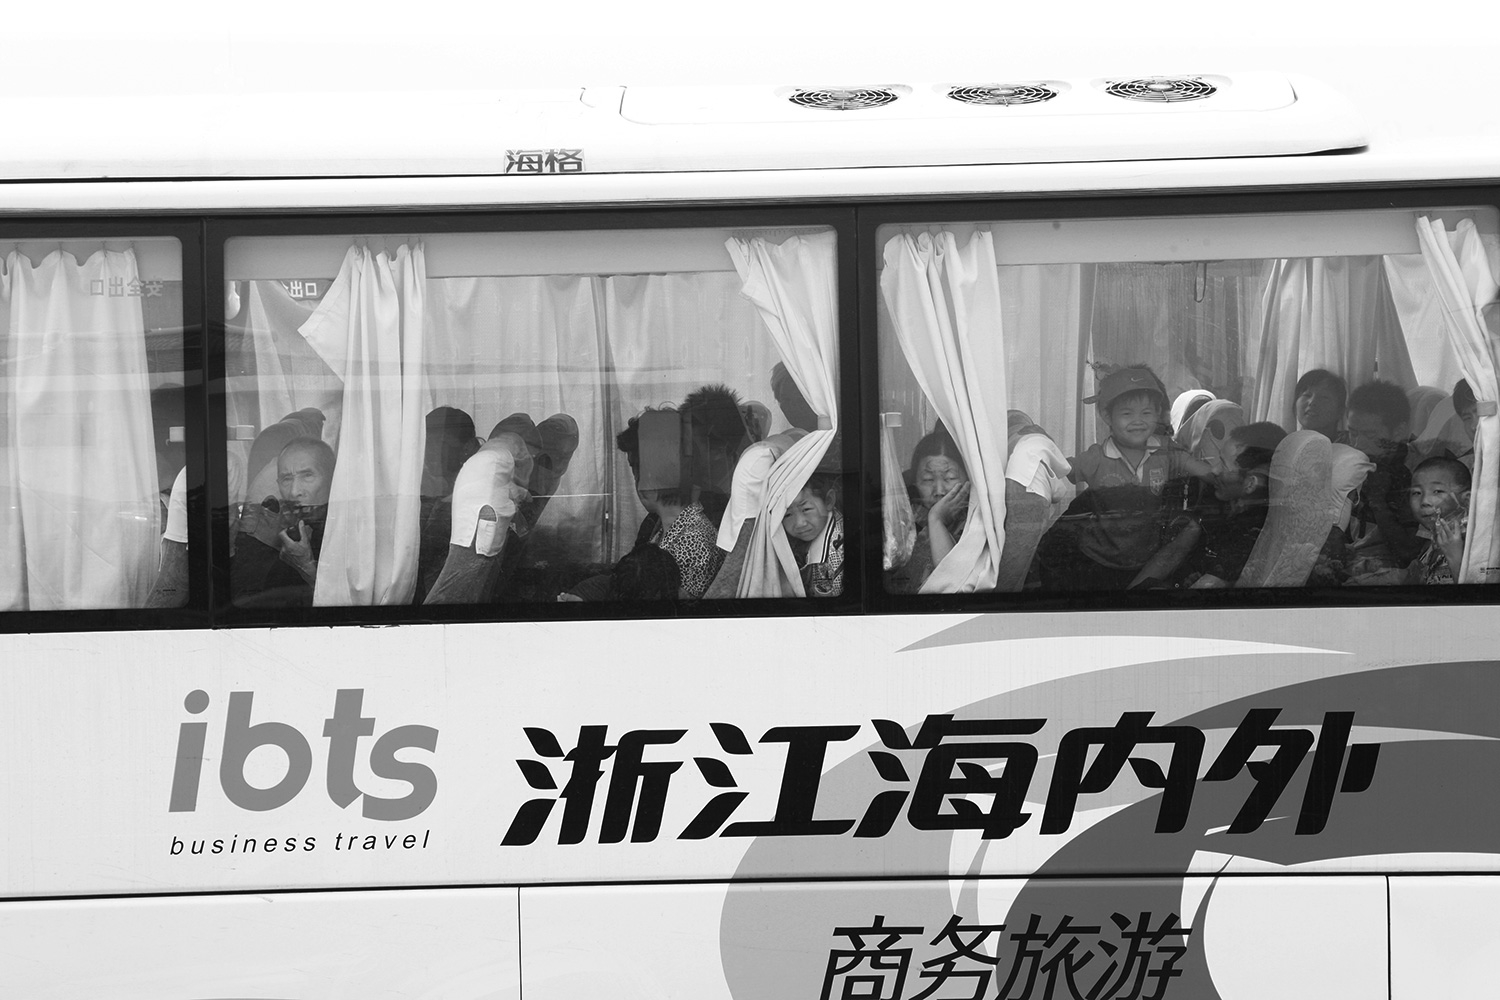 Some of the farmers board a bus to leave their homes and the village of Jinhe.